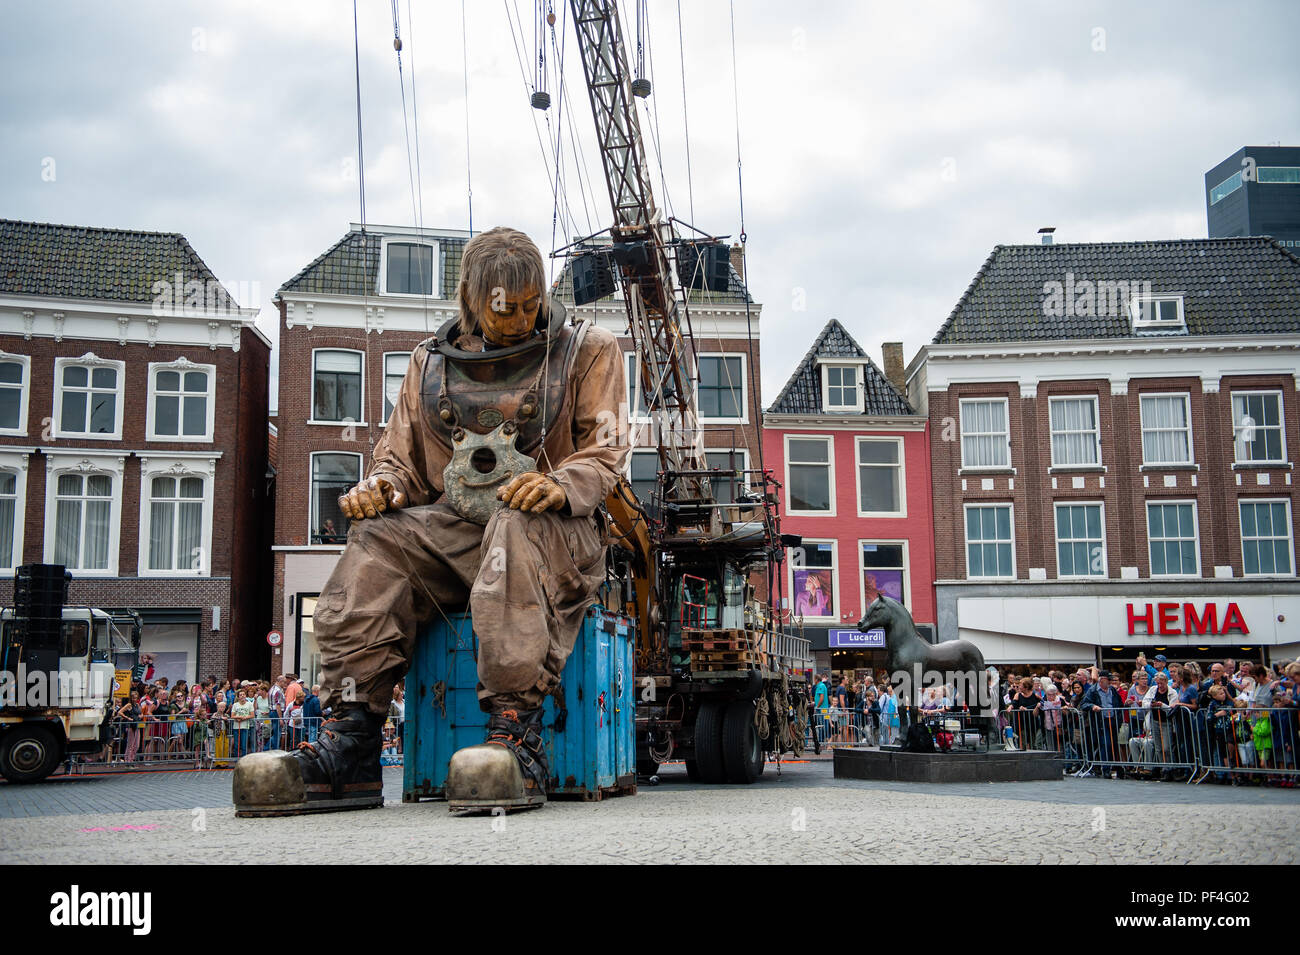 Leeuwarden, The Netherlands, 18th August, 2018. The world-famous production of Royal de Luxe makes its Dutch premiere in the European Capital of Culture. These towering giants walk the streets of Leeuwarden and provide an unforgettable experience with their 'Big Skate in the Ice' show. Royal de Luxe is an extraordinary street theatre company.  Twenty people are needed to make her move and she is Credit: Ricardo Hernandez/Alamy Live News Stock Photo